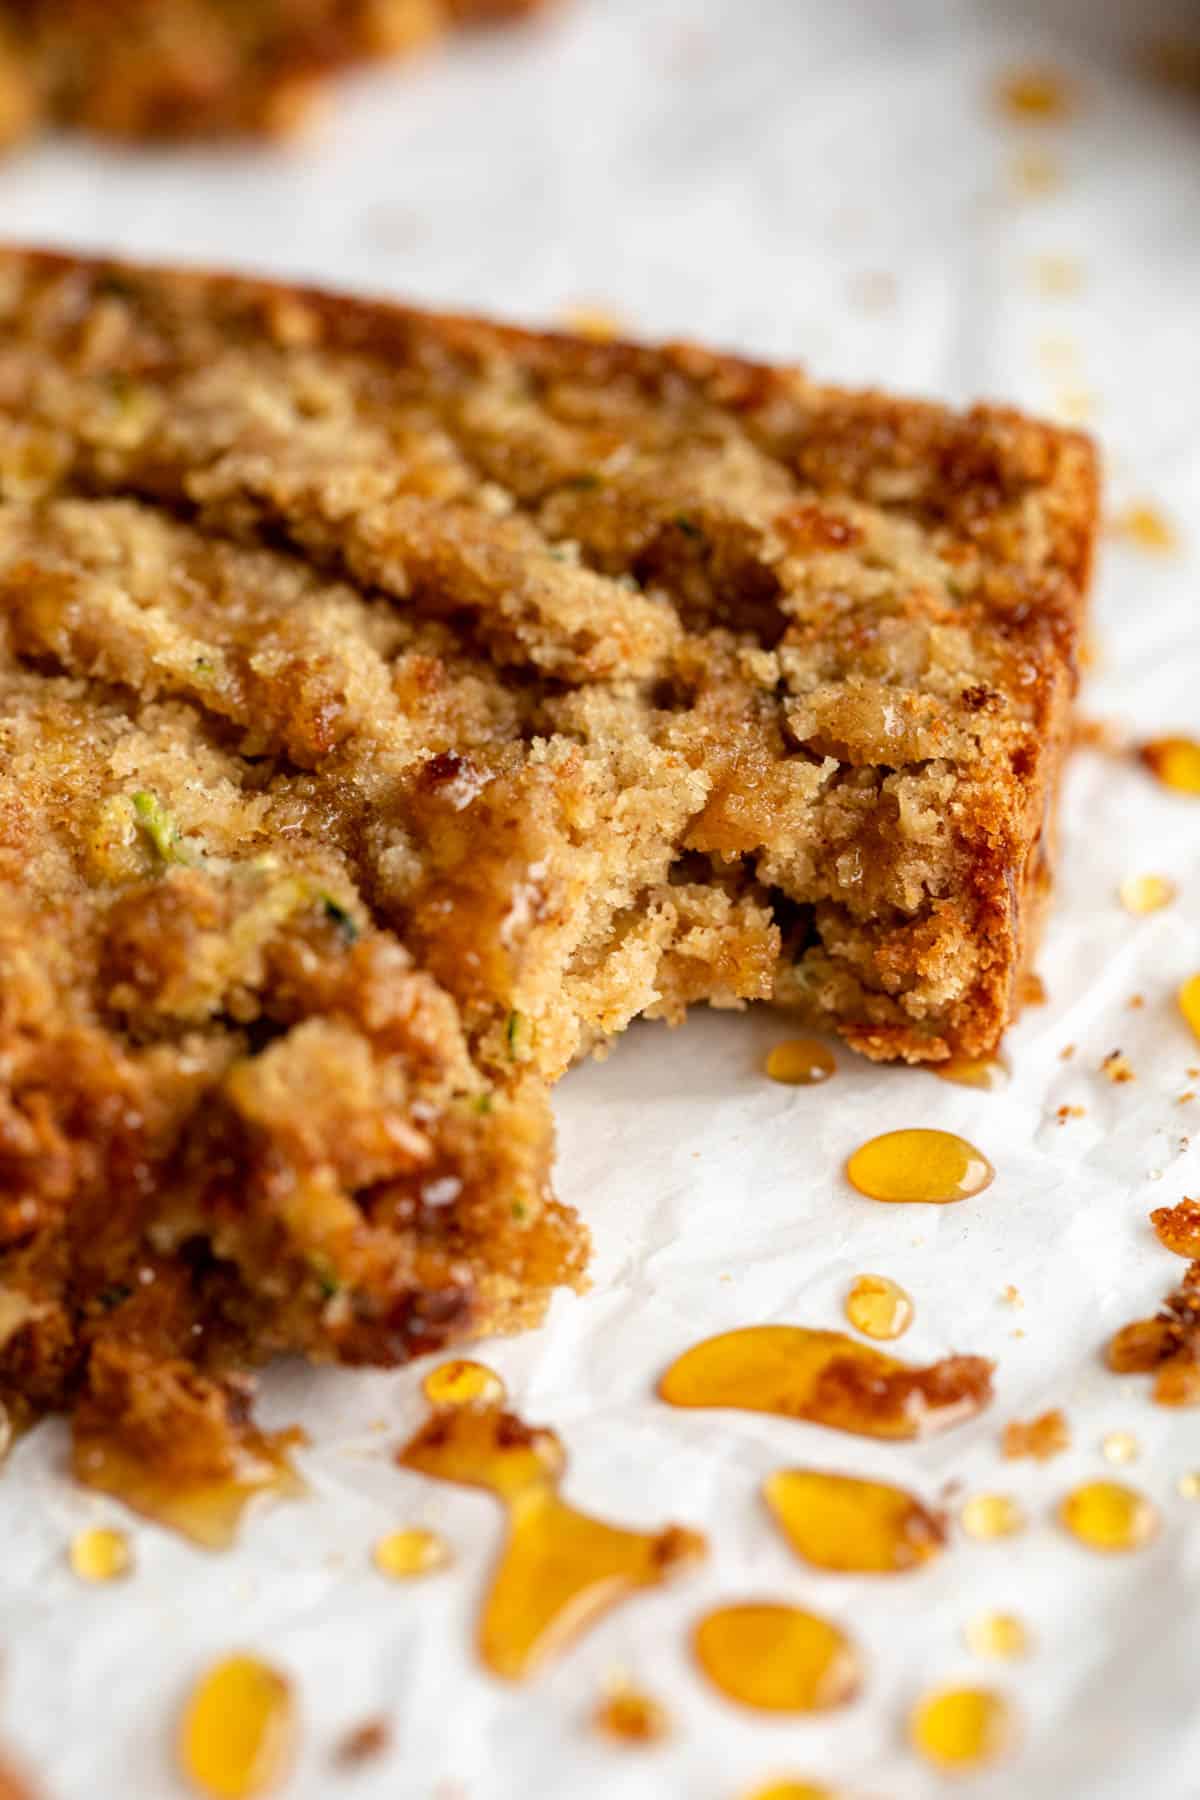 up close of the gluten free zucchini bread with honey